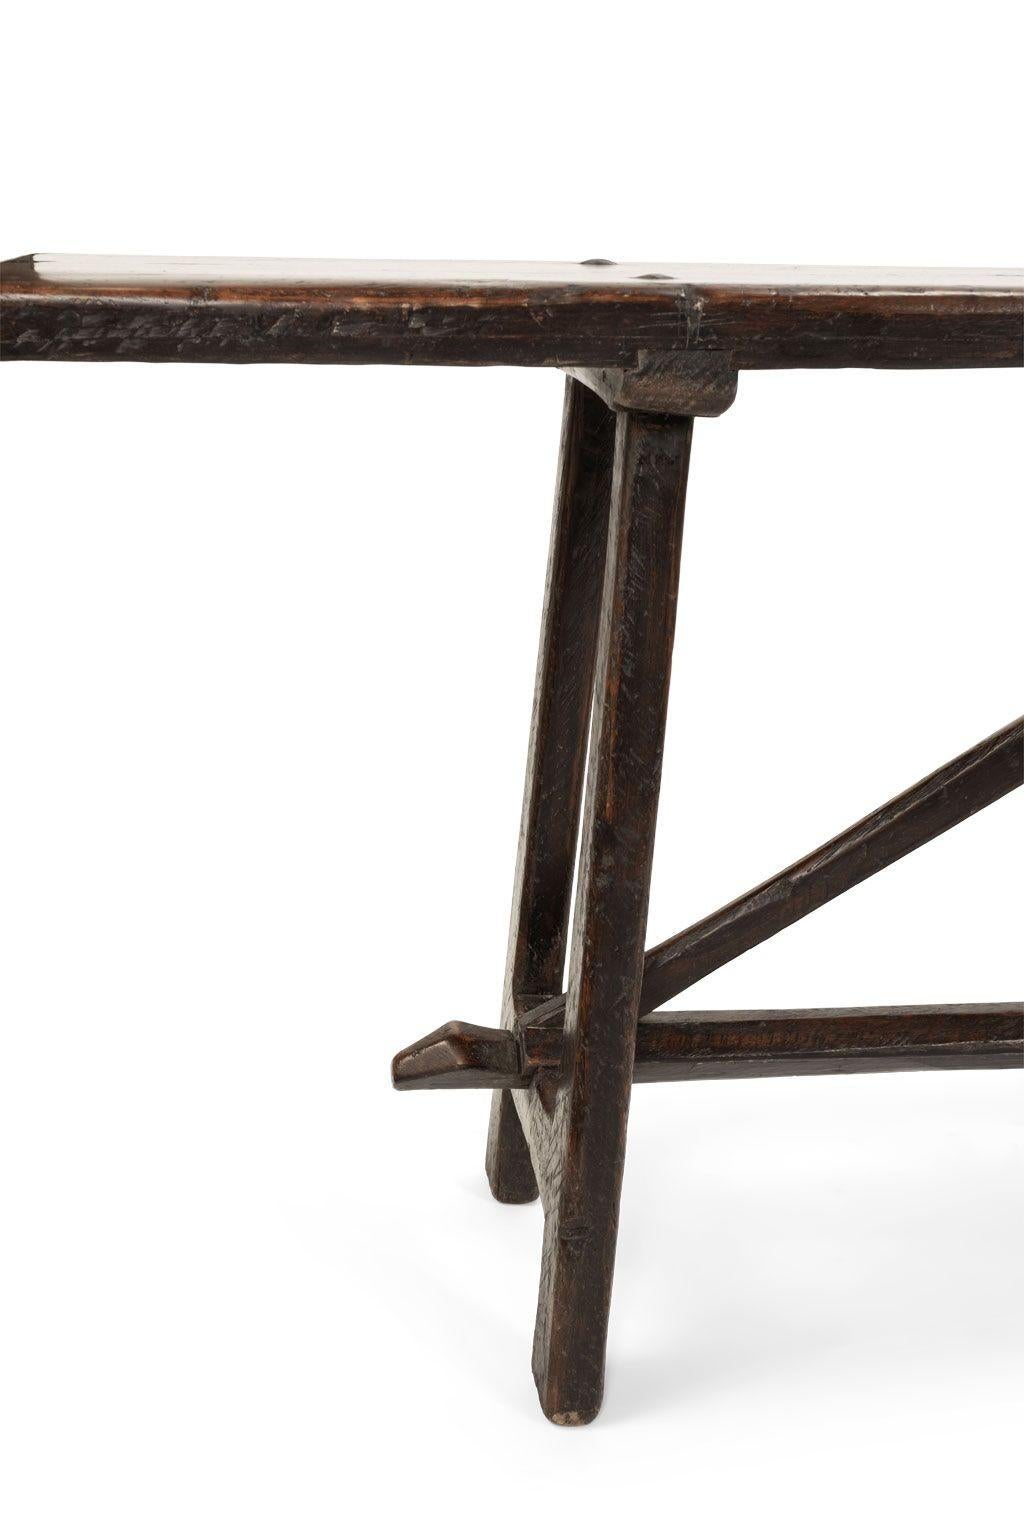 Early 18th century Italian walnut console with beautifully shaped trestle (circa 1720-1749). Hand-planed with chisel marks across underside of top. Mortise and tenon joints.